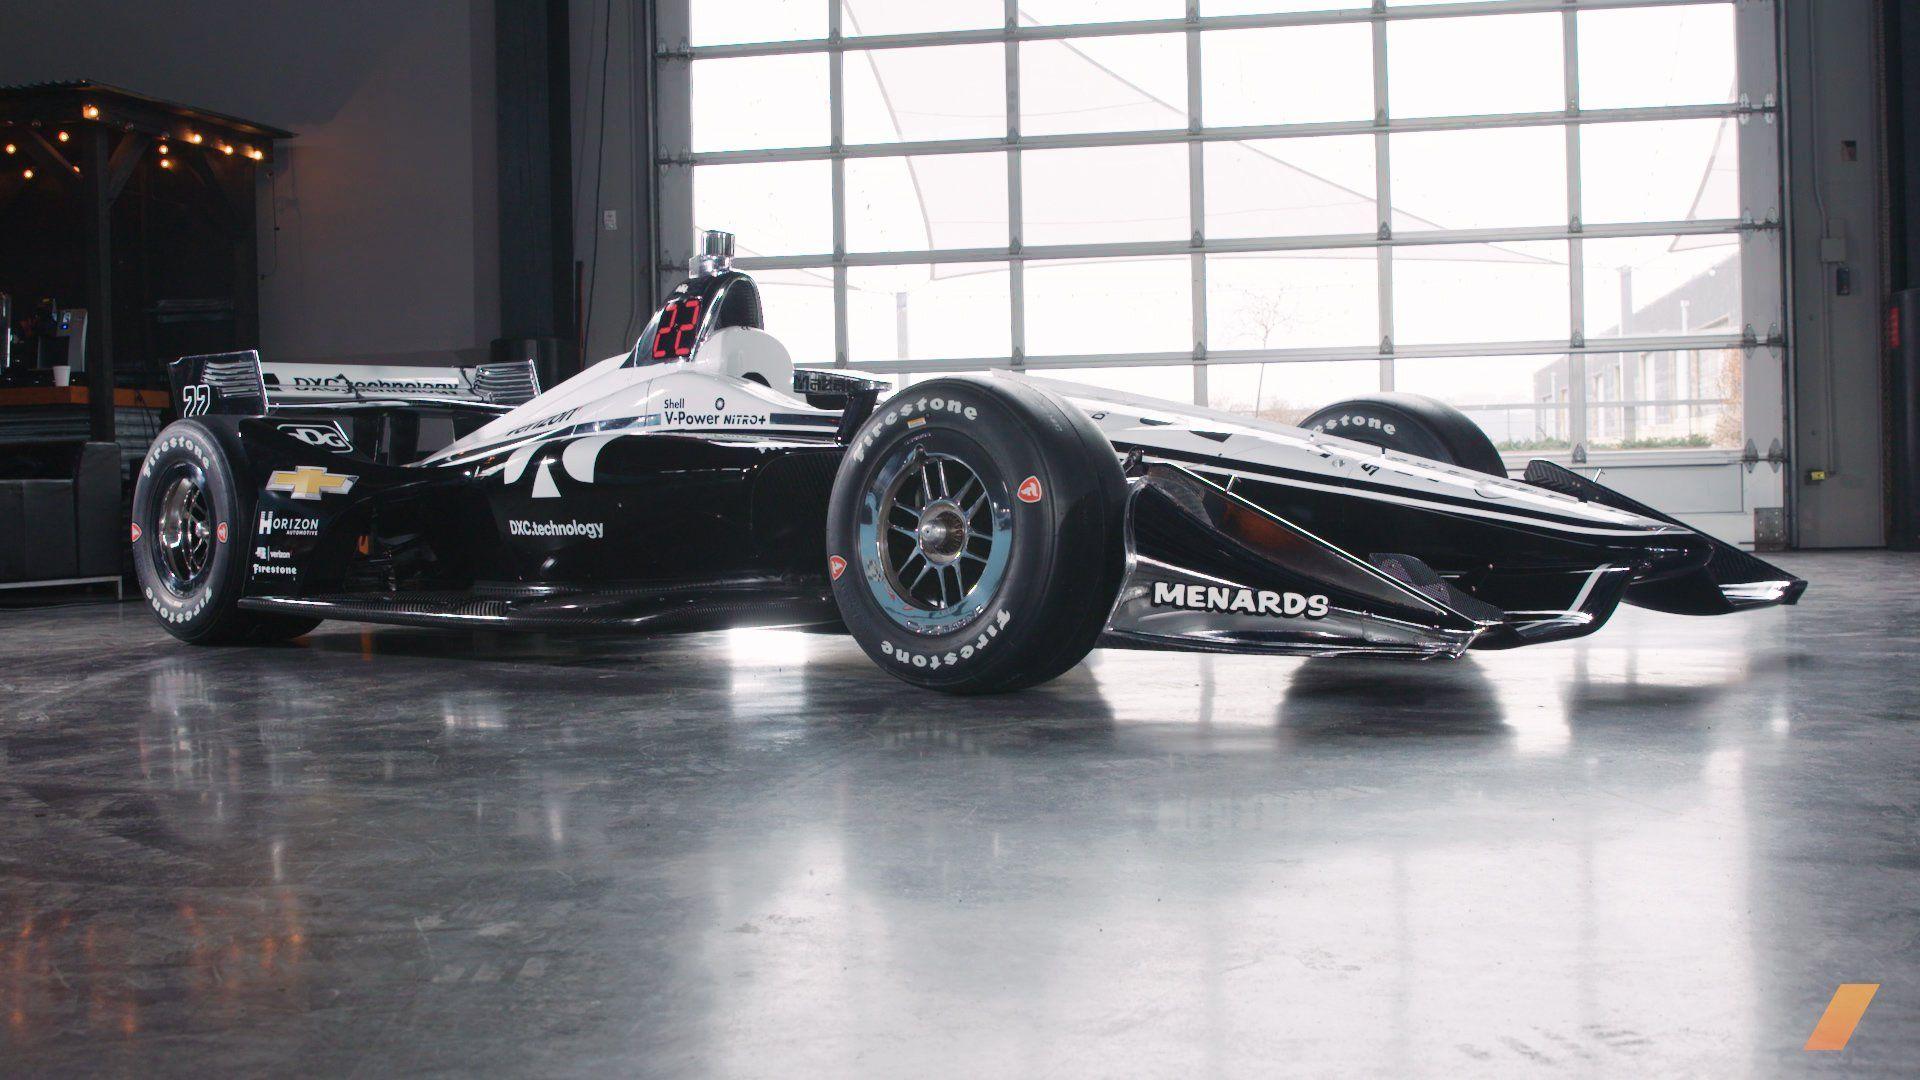 Here's What The 2018 IndyCar Body Kit Looks Like Up Close